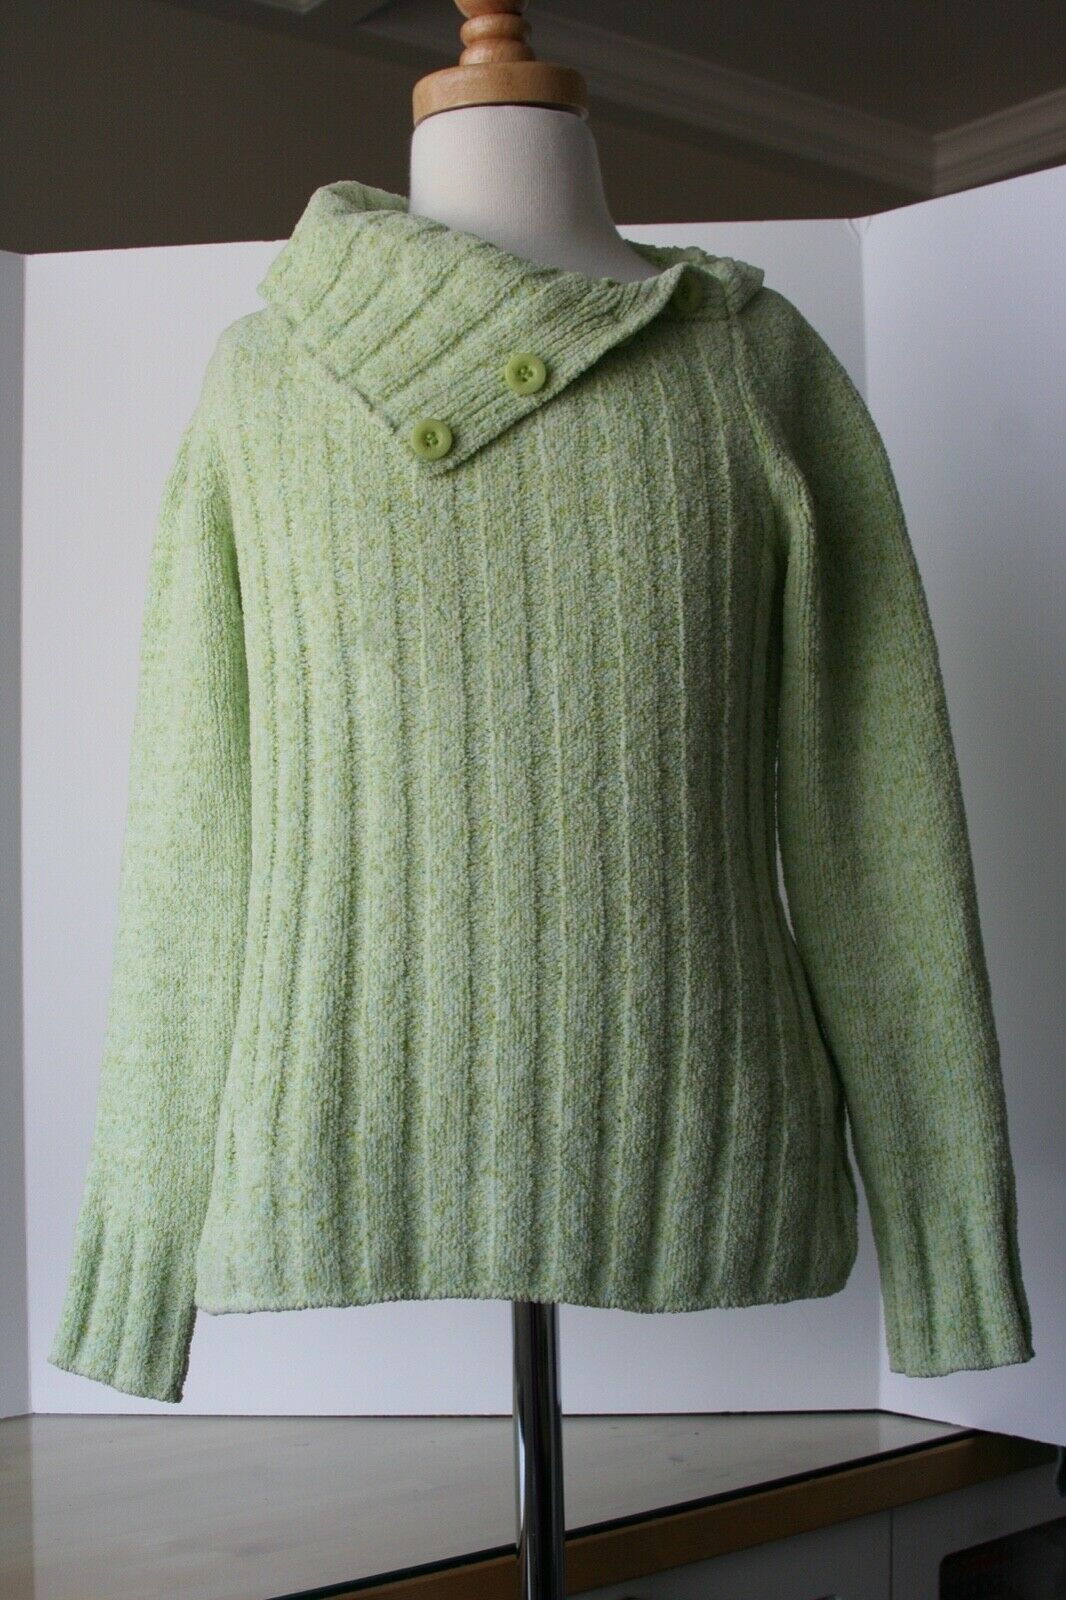 green dog Light Green Citrus Sweater with cute buttoned collar Girls size Small - $8.90